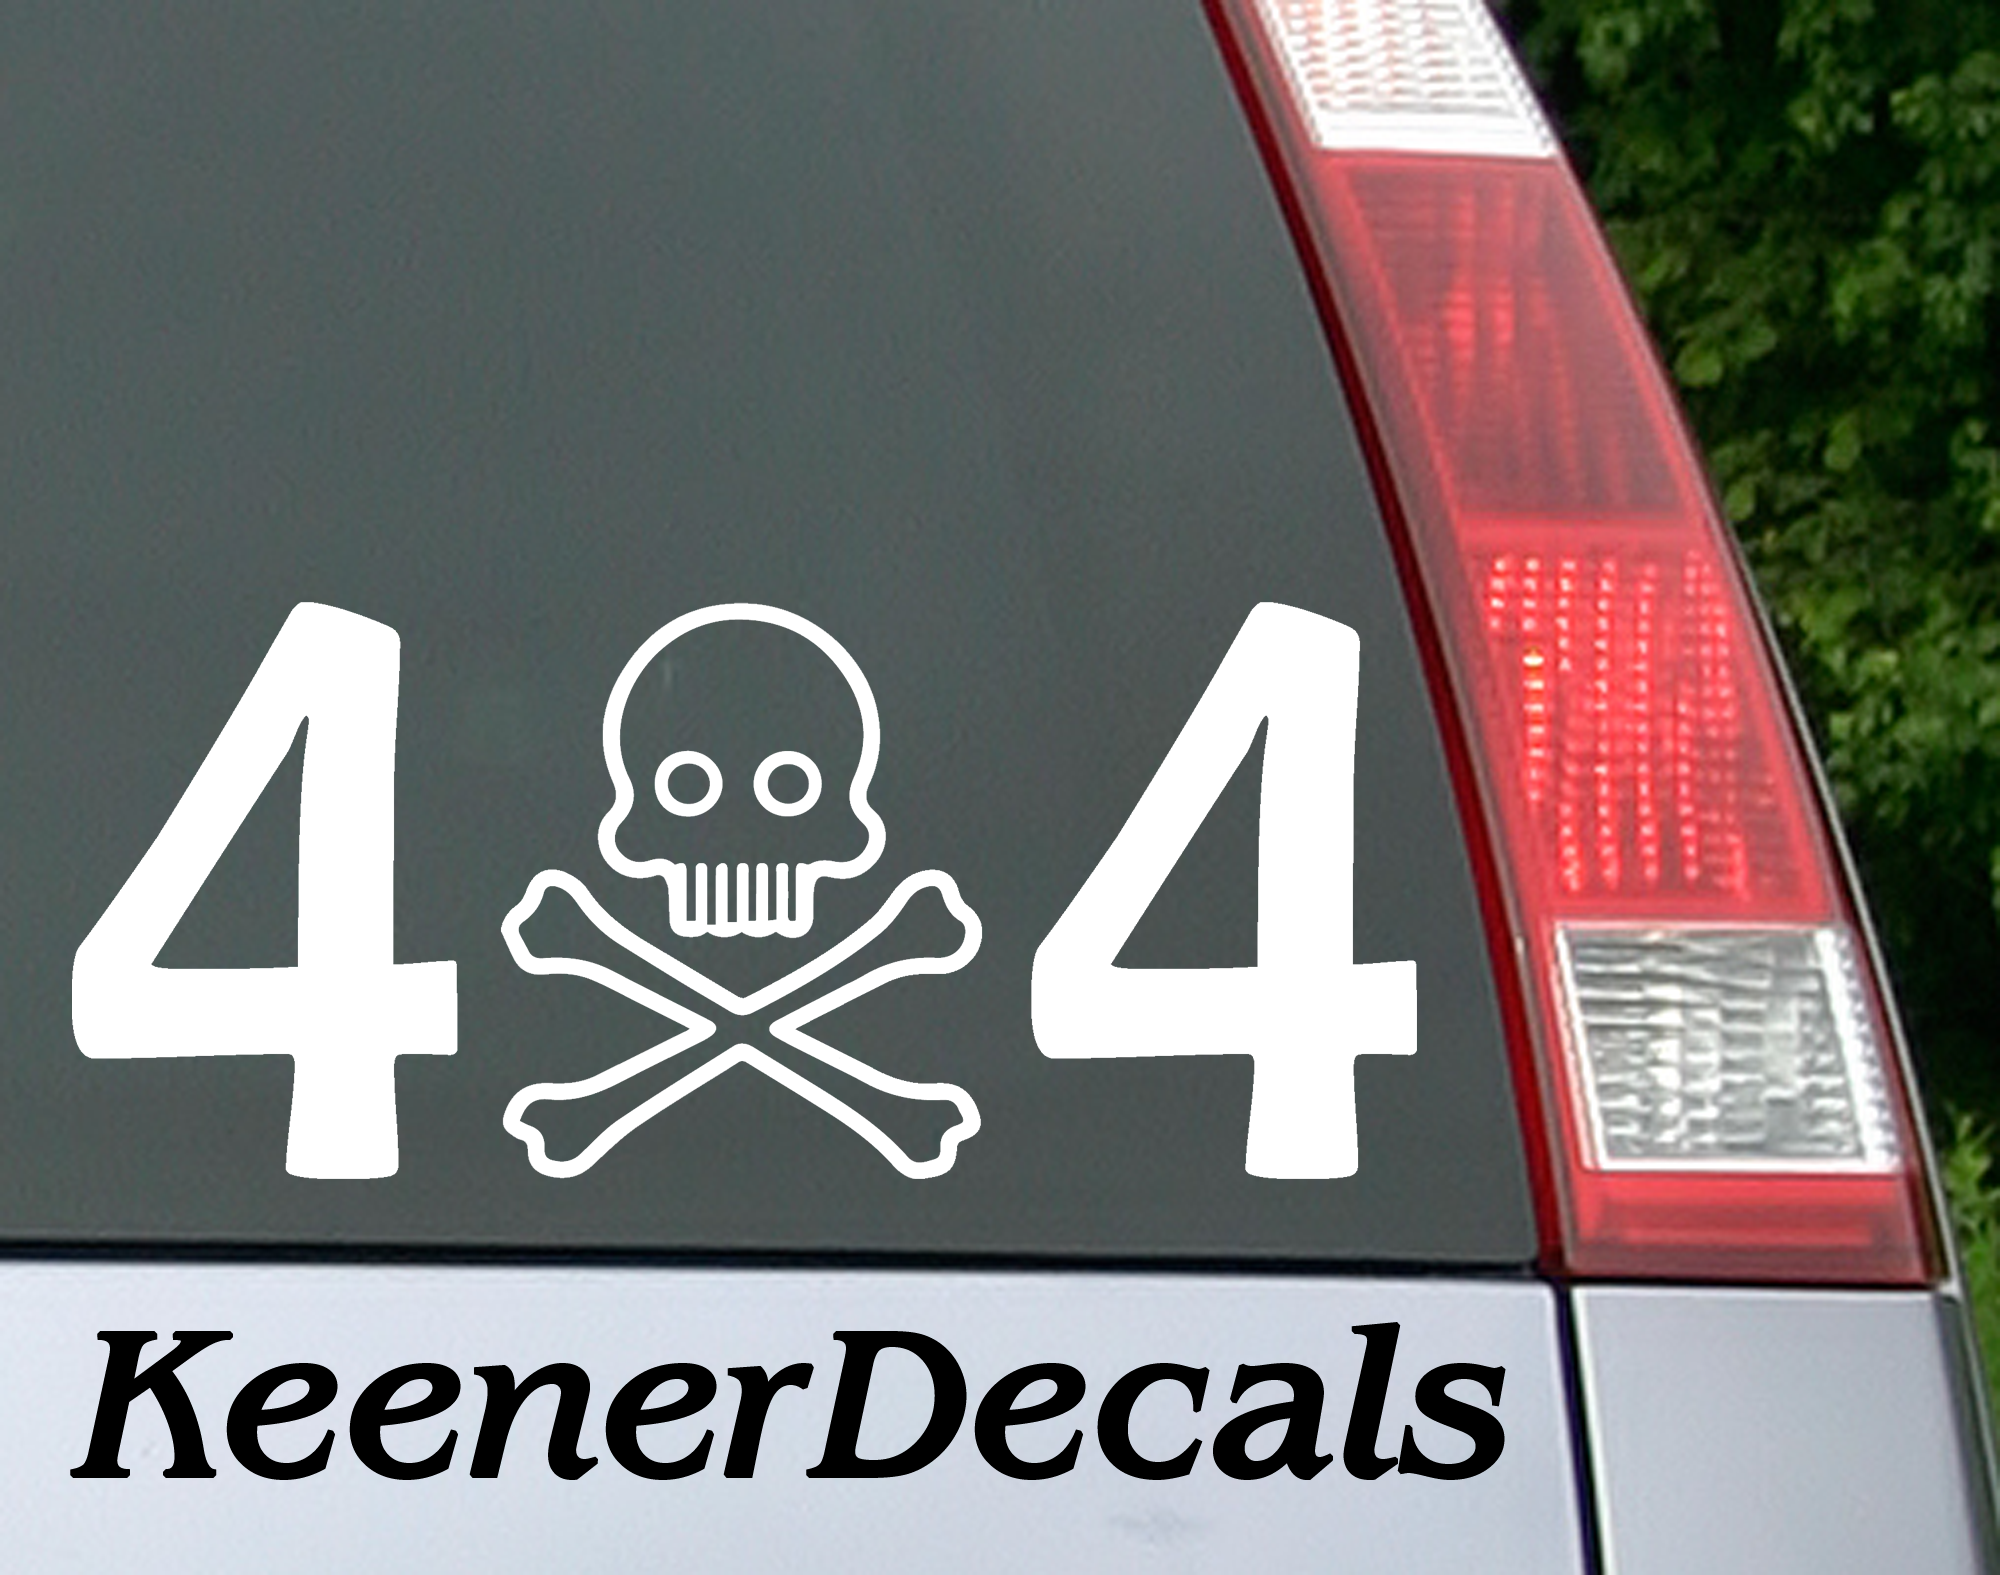 A great 4x4 vinyl decal to add to your back window. Skull and crossbones with a familiar looking grill worked into the design. ;)  7"W x 3"H Car Decal, Car Sticker, Car Vinyl, Bumper Sticker, Vinyl Stickers, Vinyl Sticker.